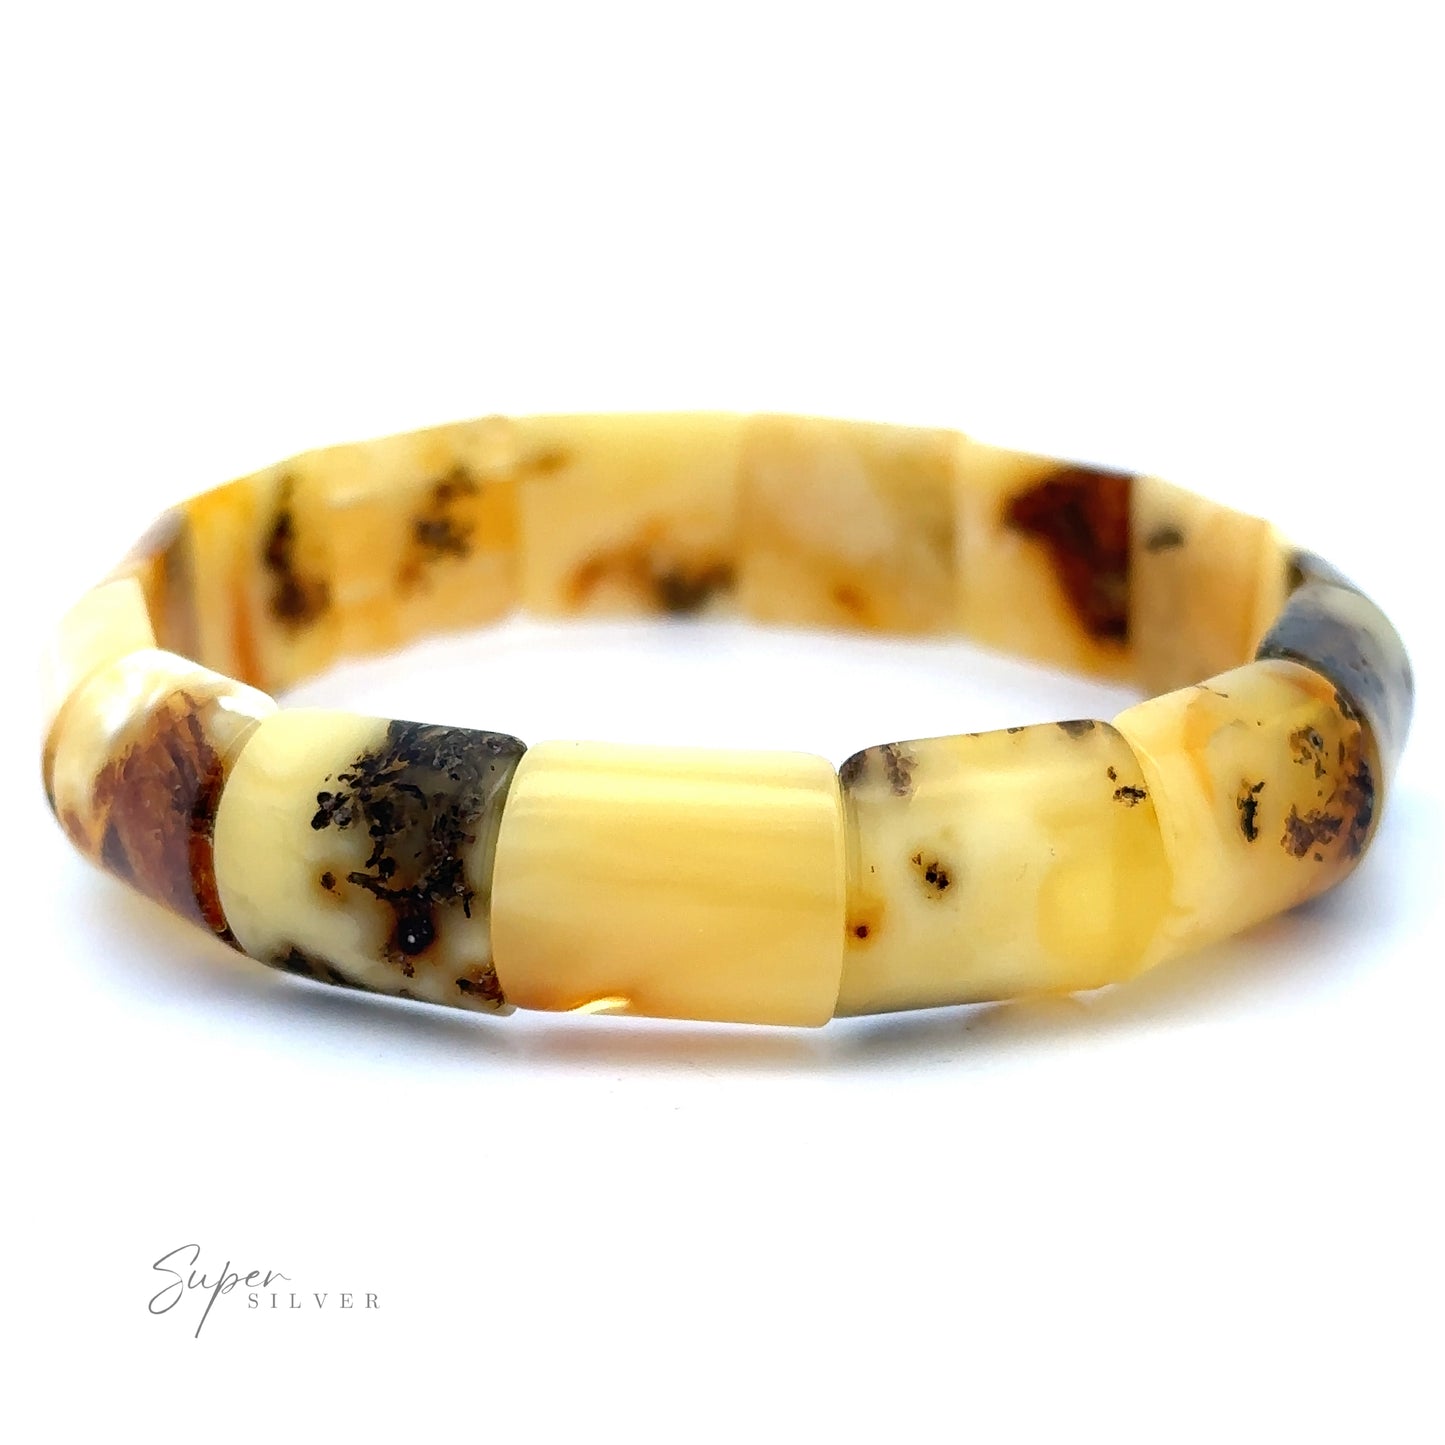 A close-up of a polished Brilliant Butterscotch Amber Stretch Bracelet composed of various shades of yellow and brown butterscotch beads, arranged in a circular fashion on a white background.